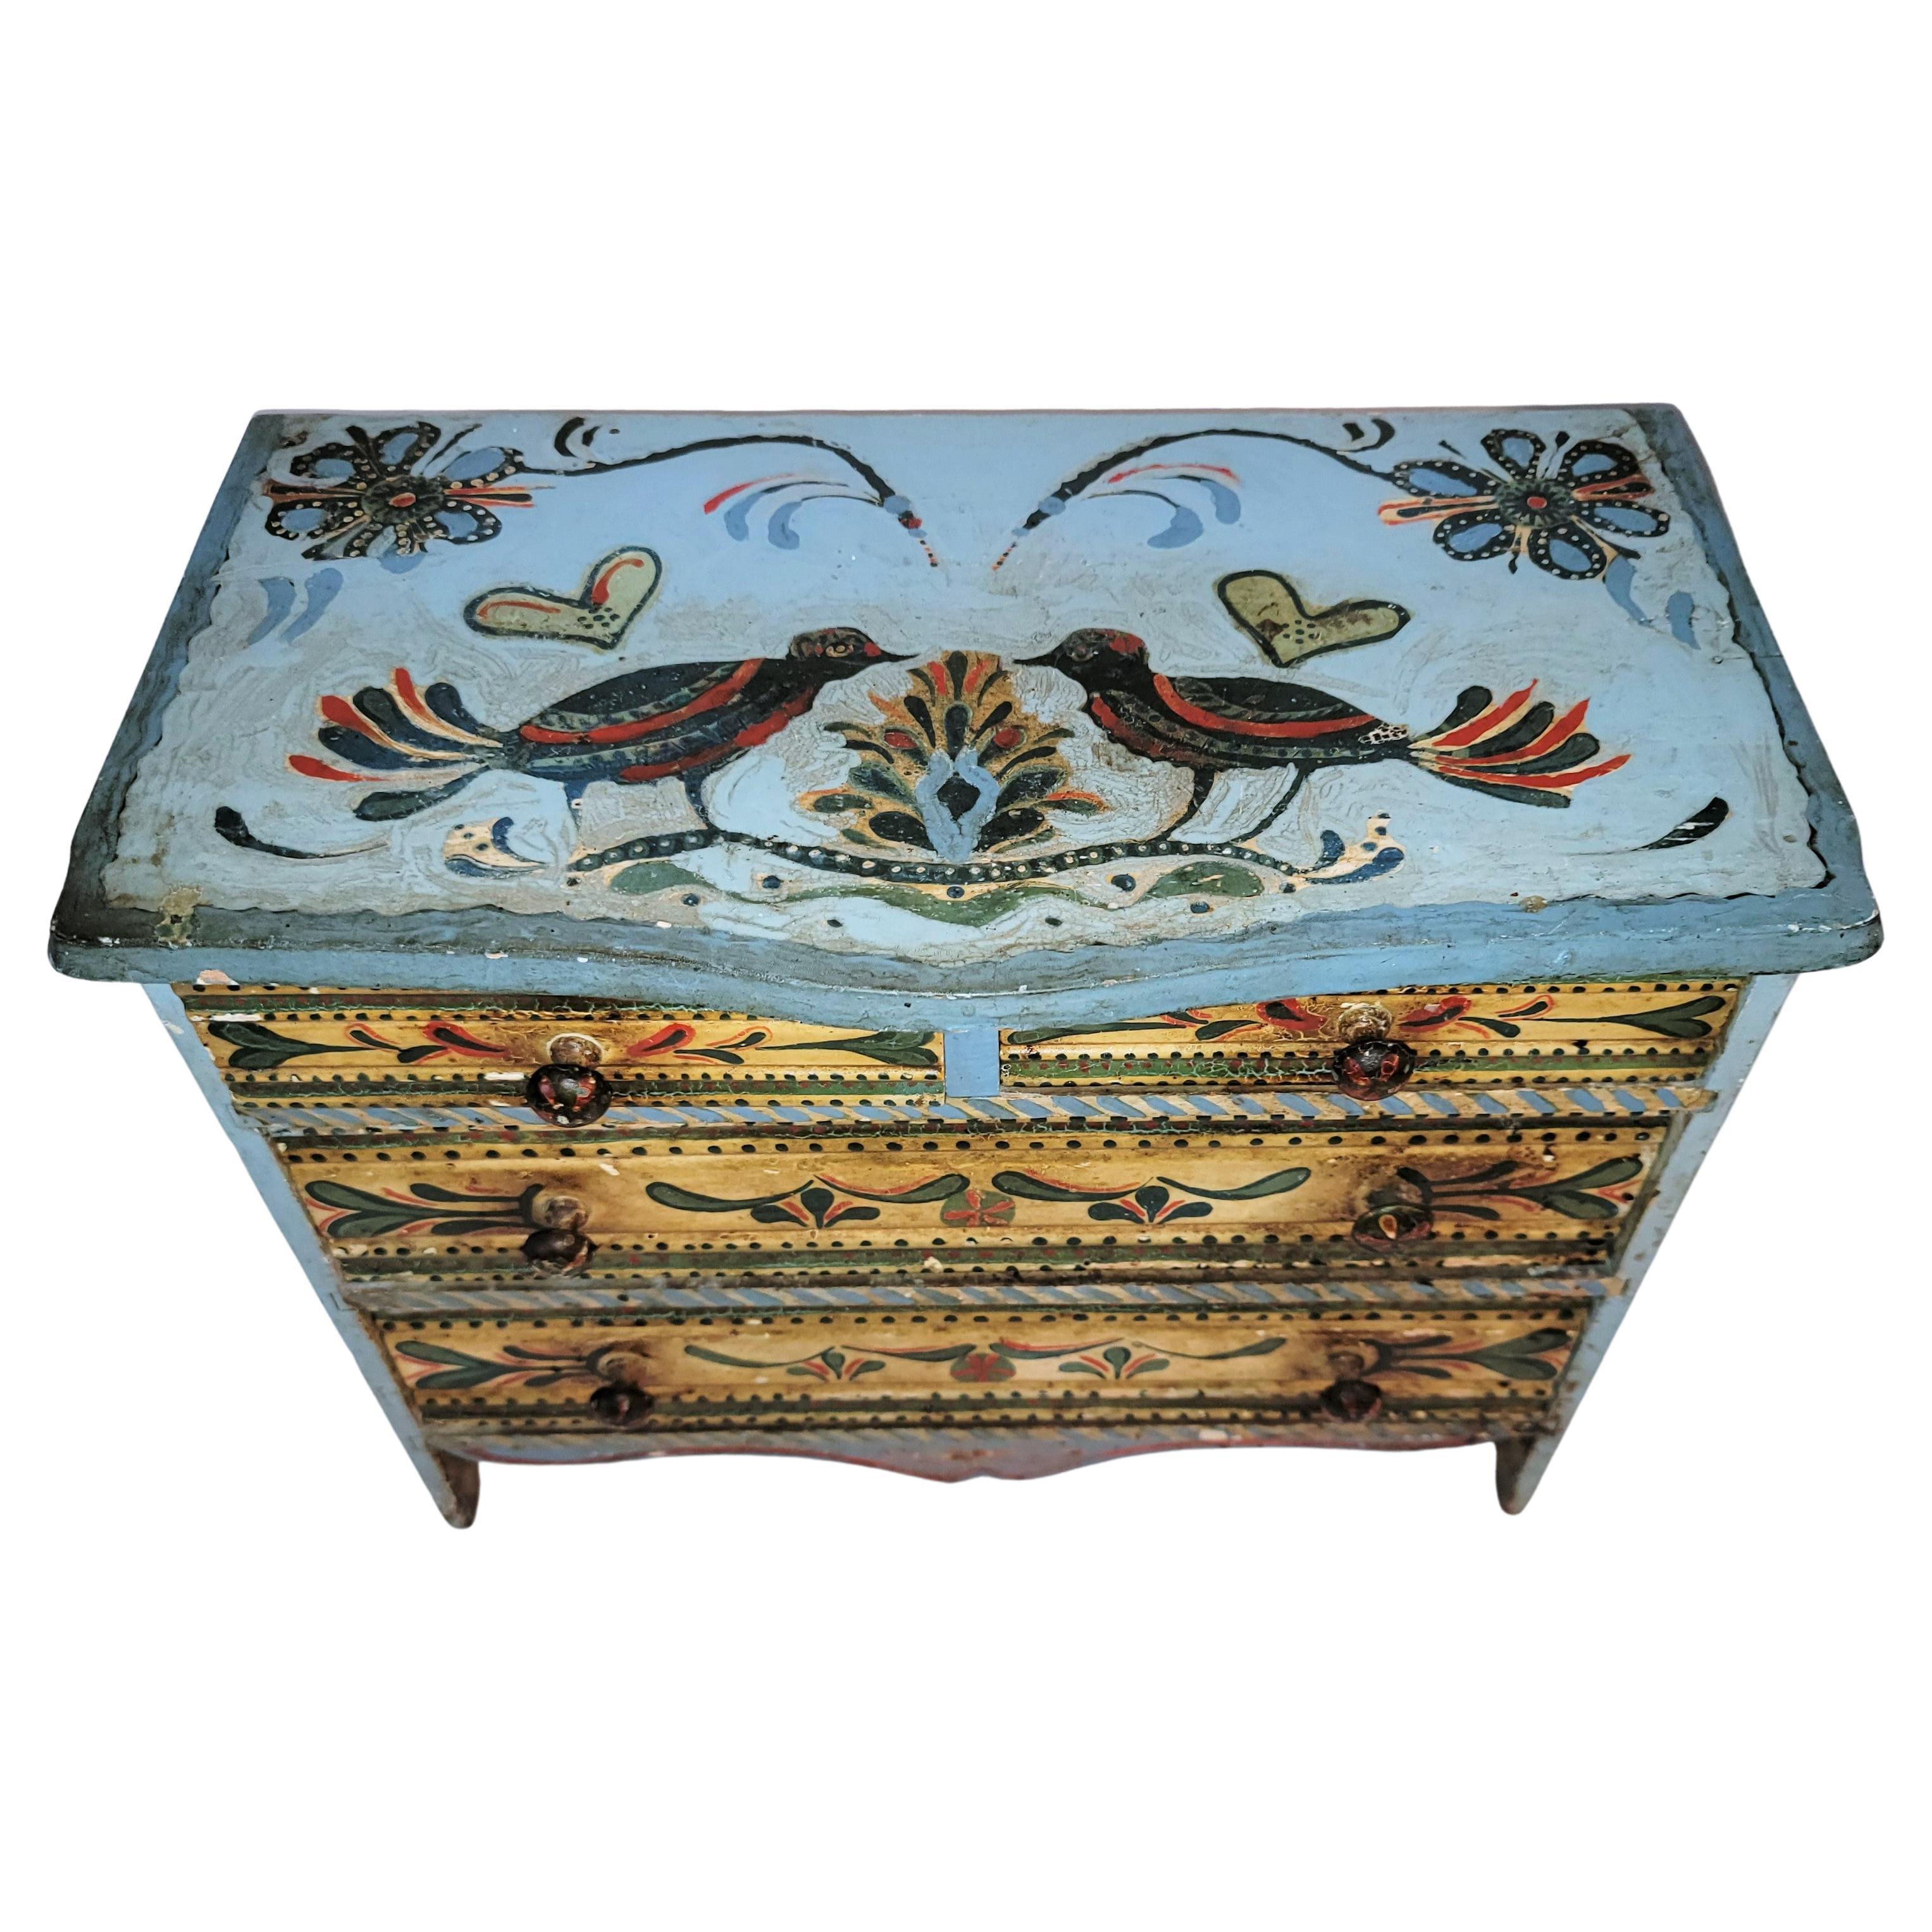 19th C original painted decorated doll or jewelry chester drawers. Decorated in the 20's or 30's.